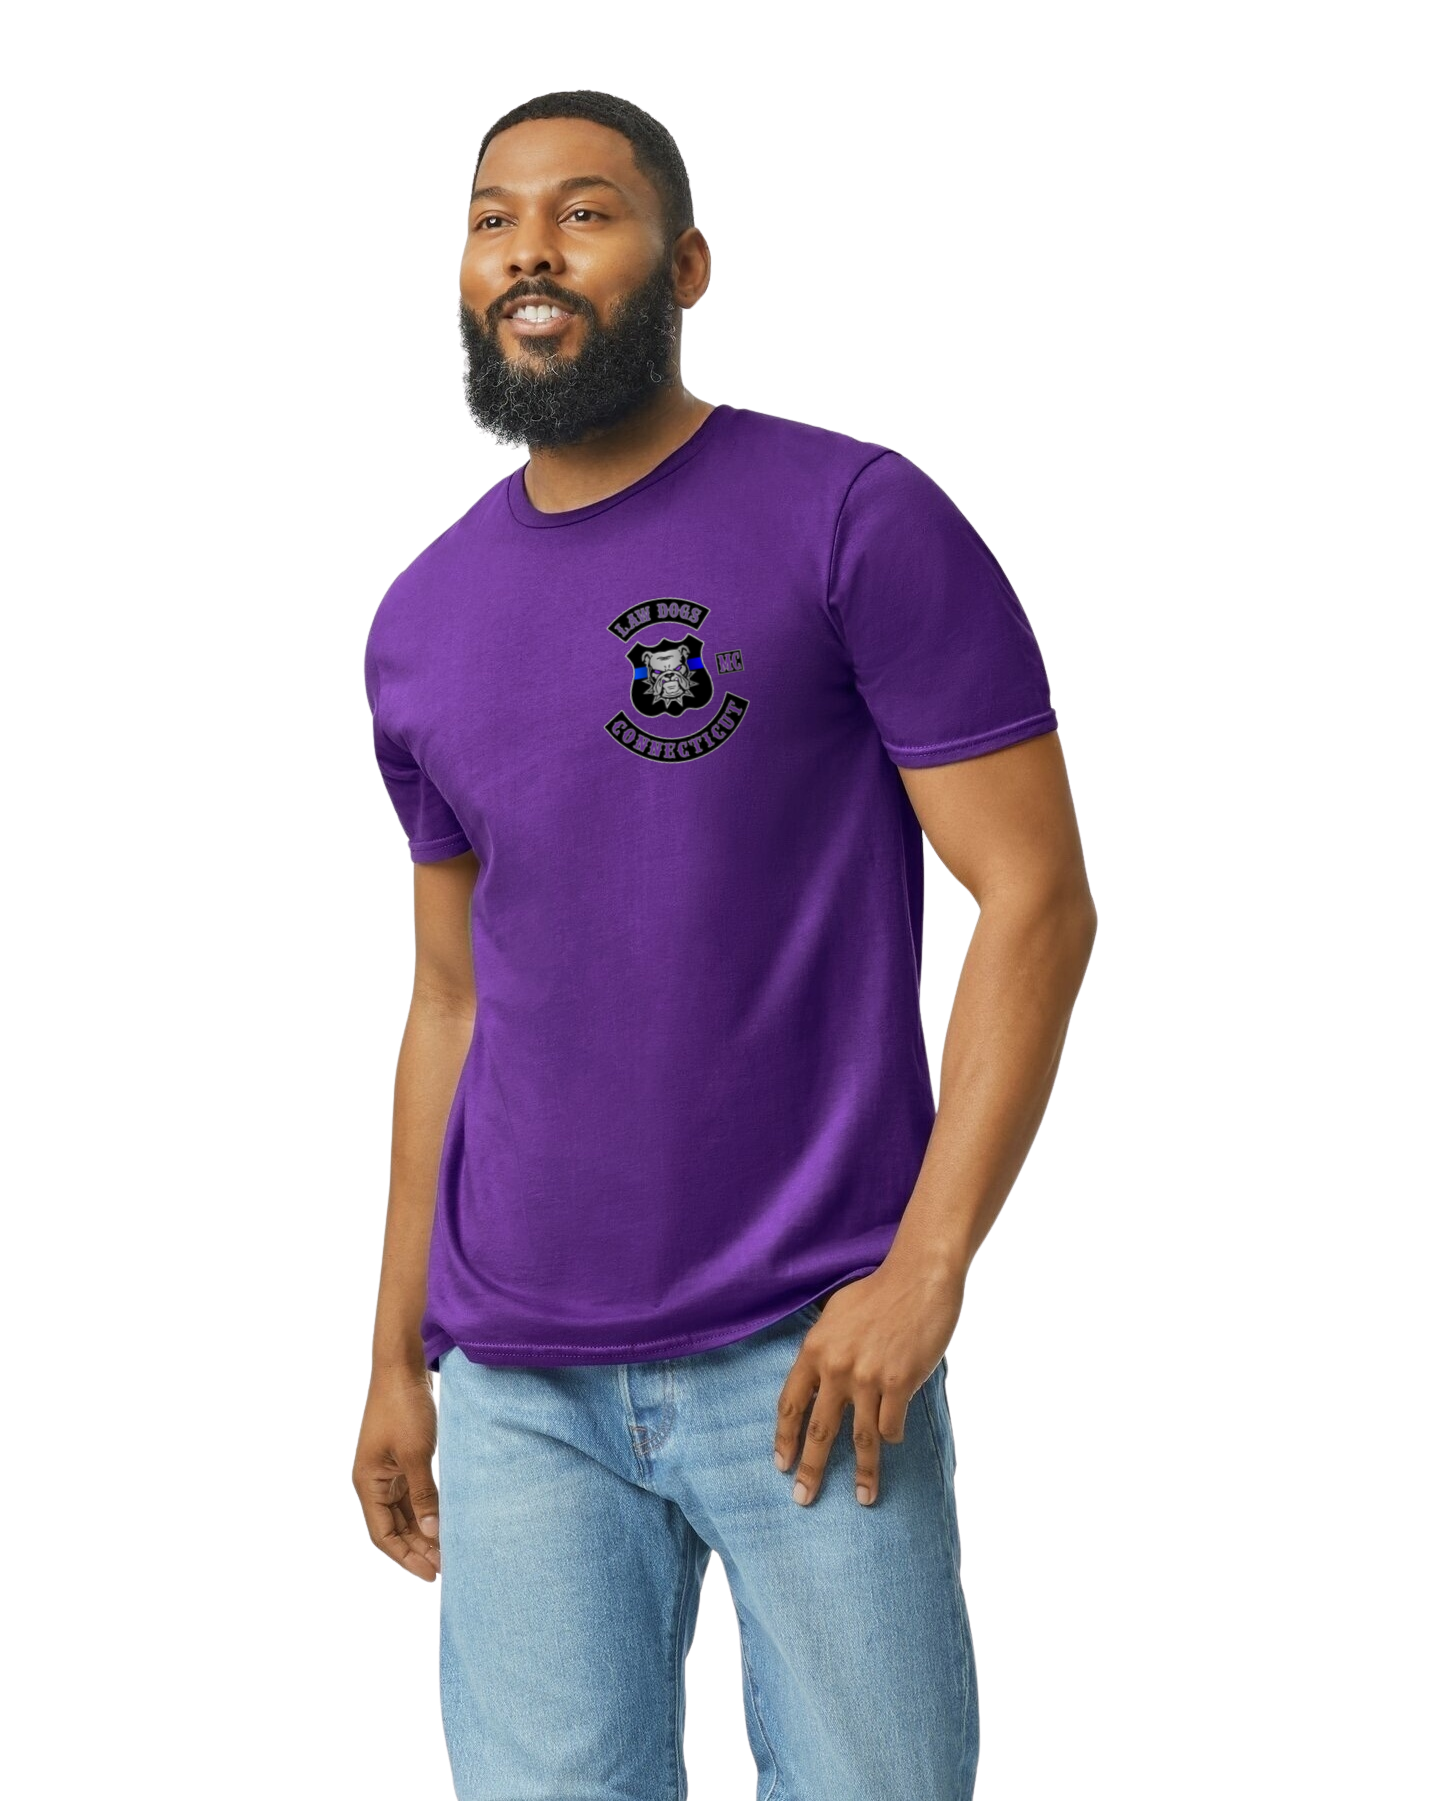 Law Dogs MEMBERS Adult Softstyle Tee - Many colors and customizable!